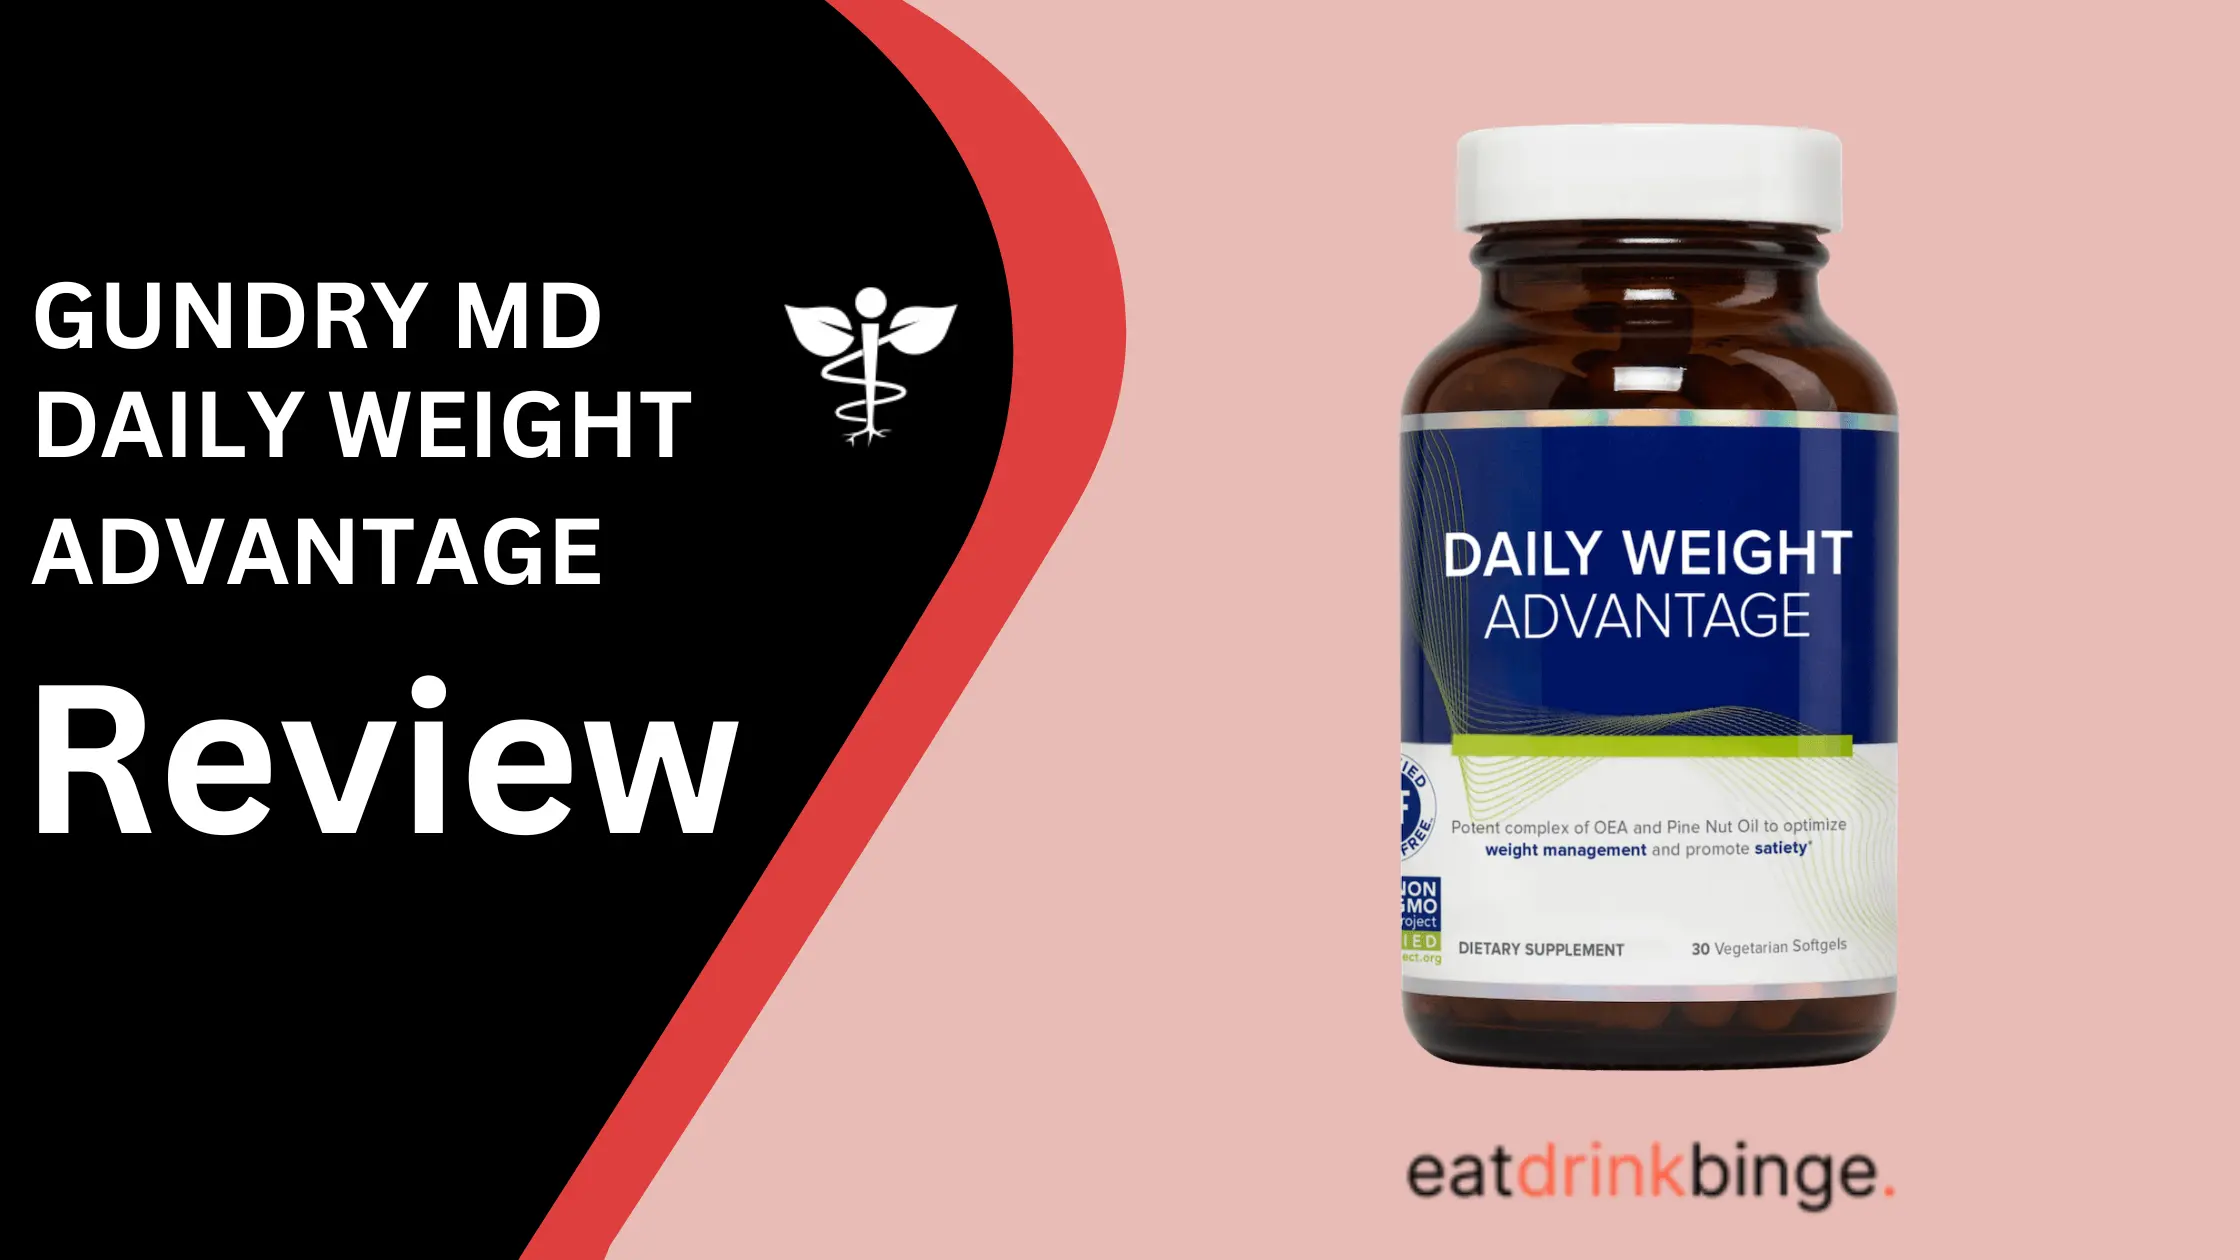 Daily Weight Advantage Featured Image